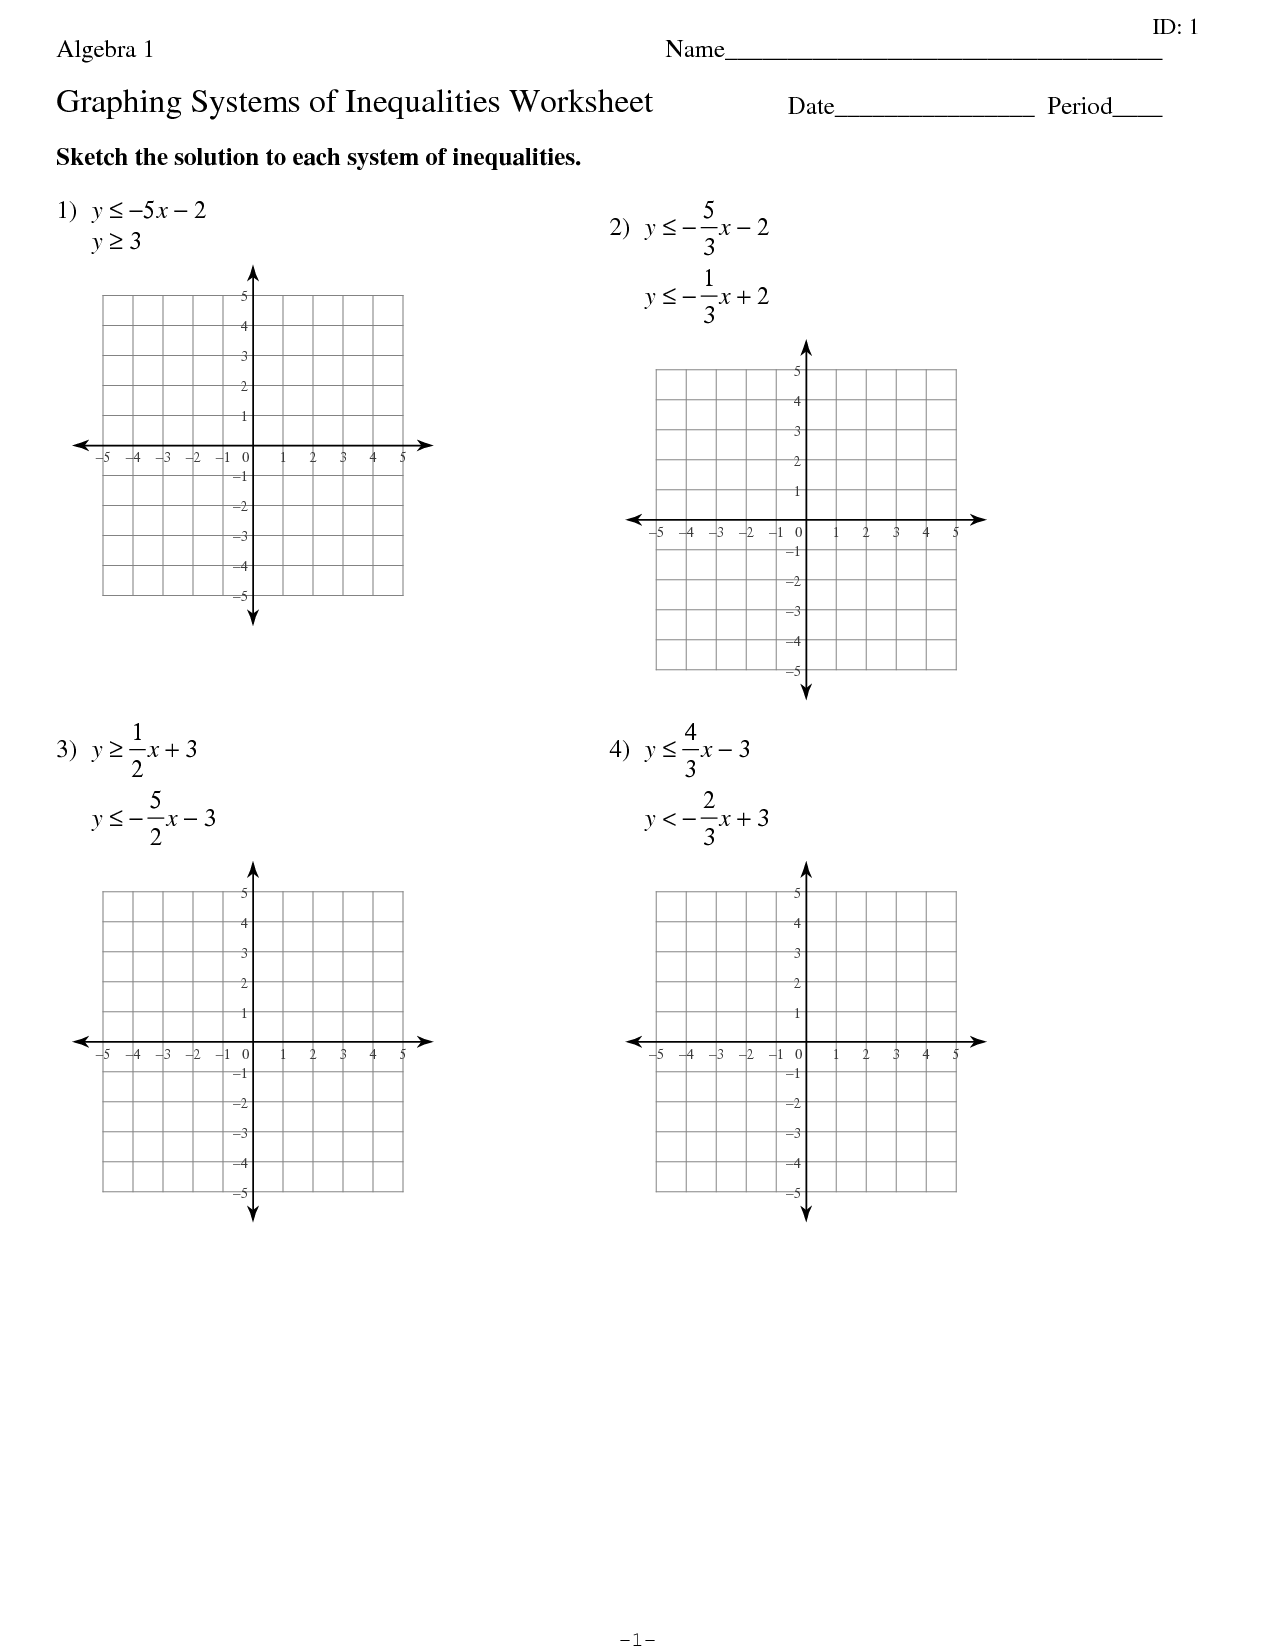 15 Best Images of Graphing Two Variable Inequalities Worksheet  Graphing Linear Inequalities 